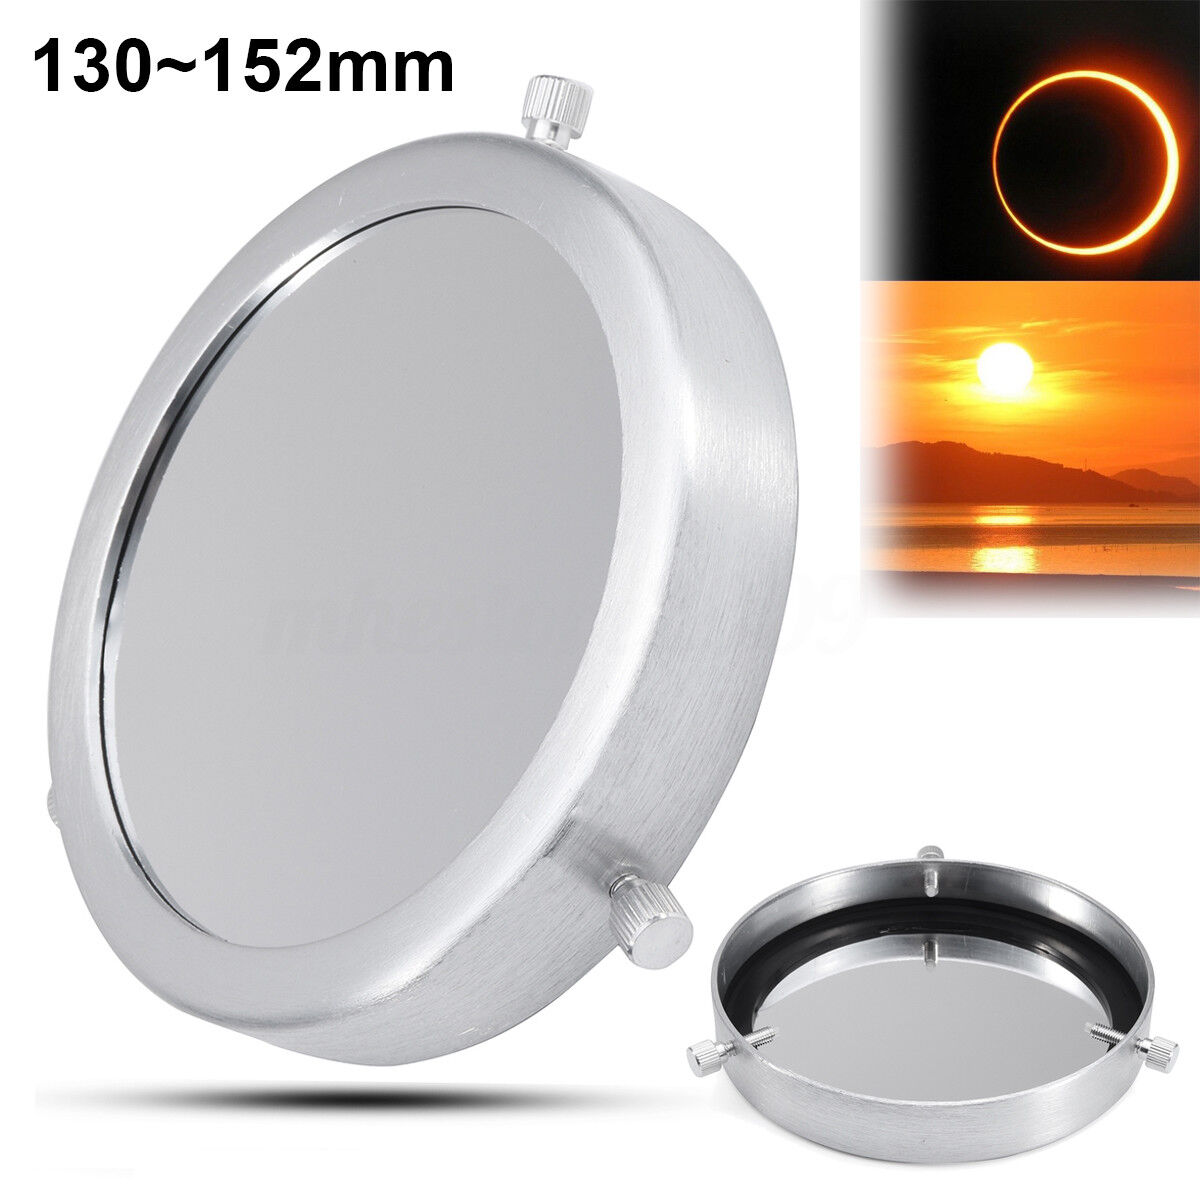 1 Pcs 130~152 mm Solar Filter Baader Film Metal Cover For Astronomical Telescope